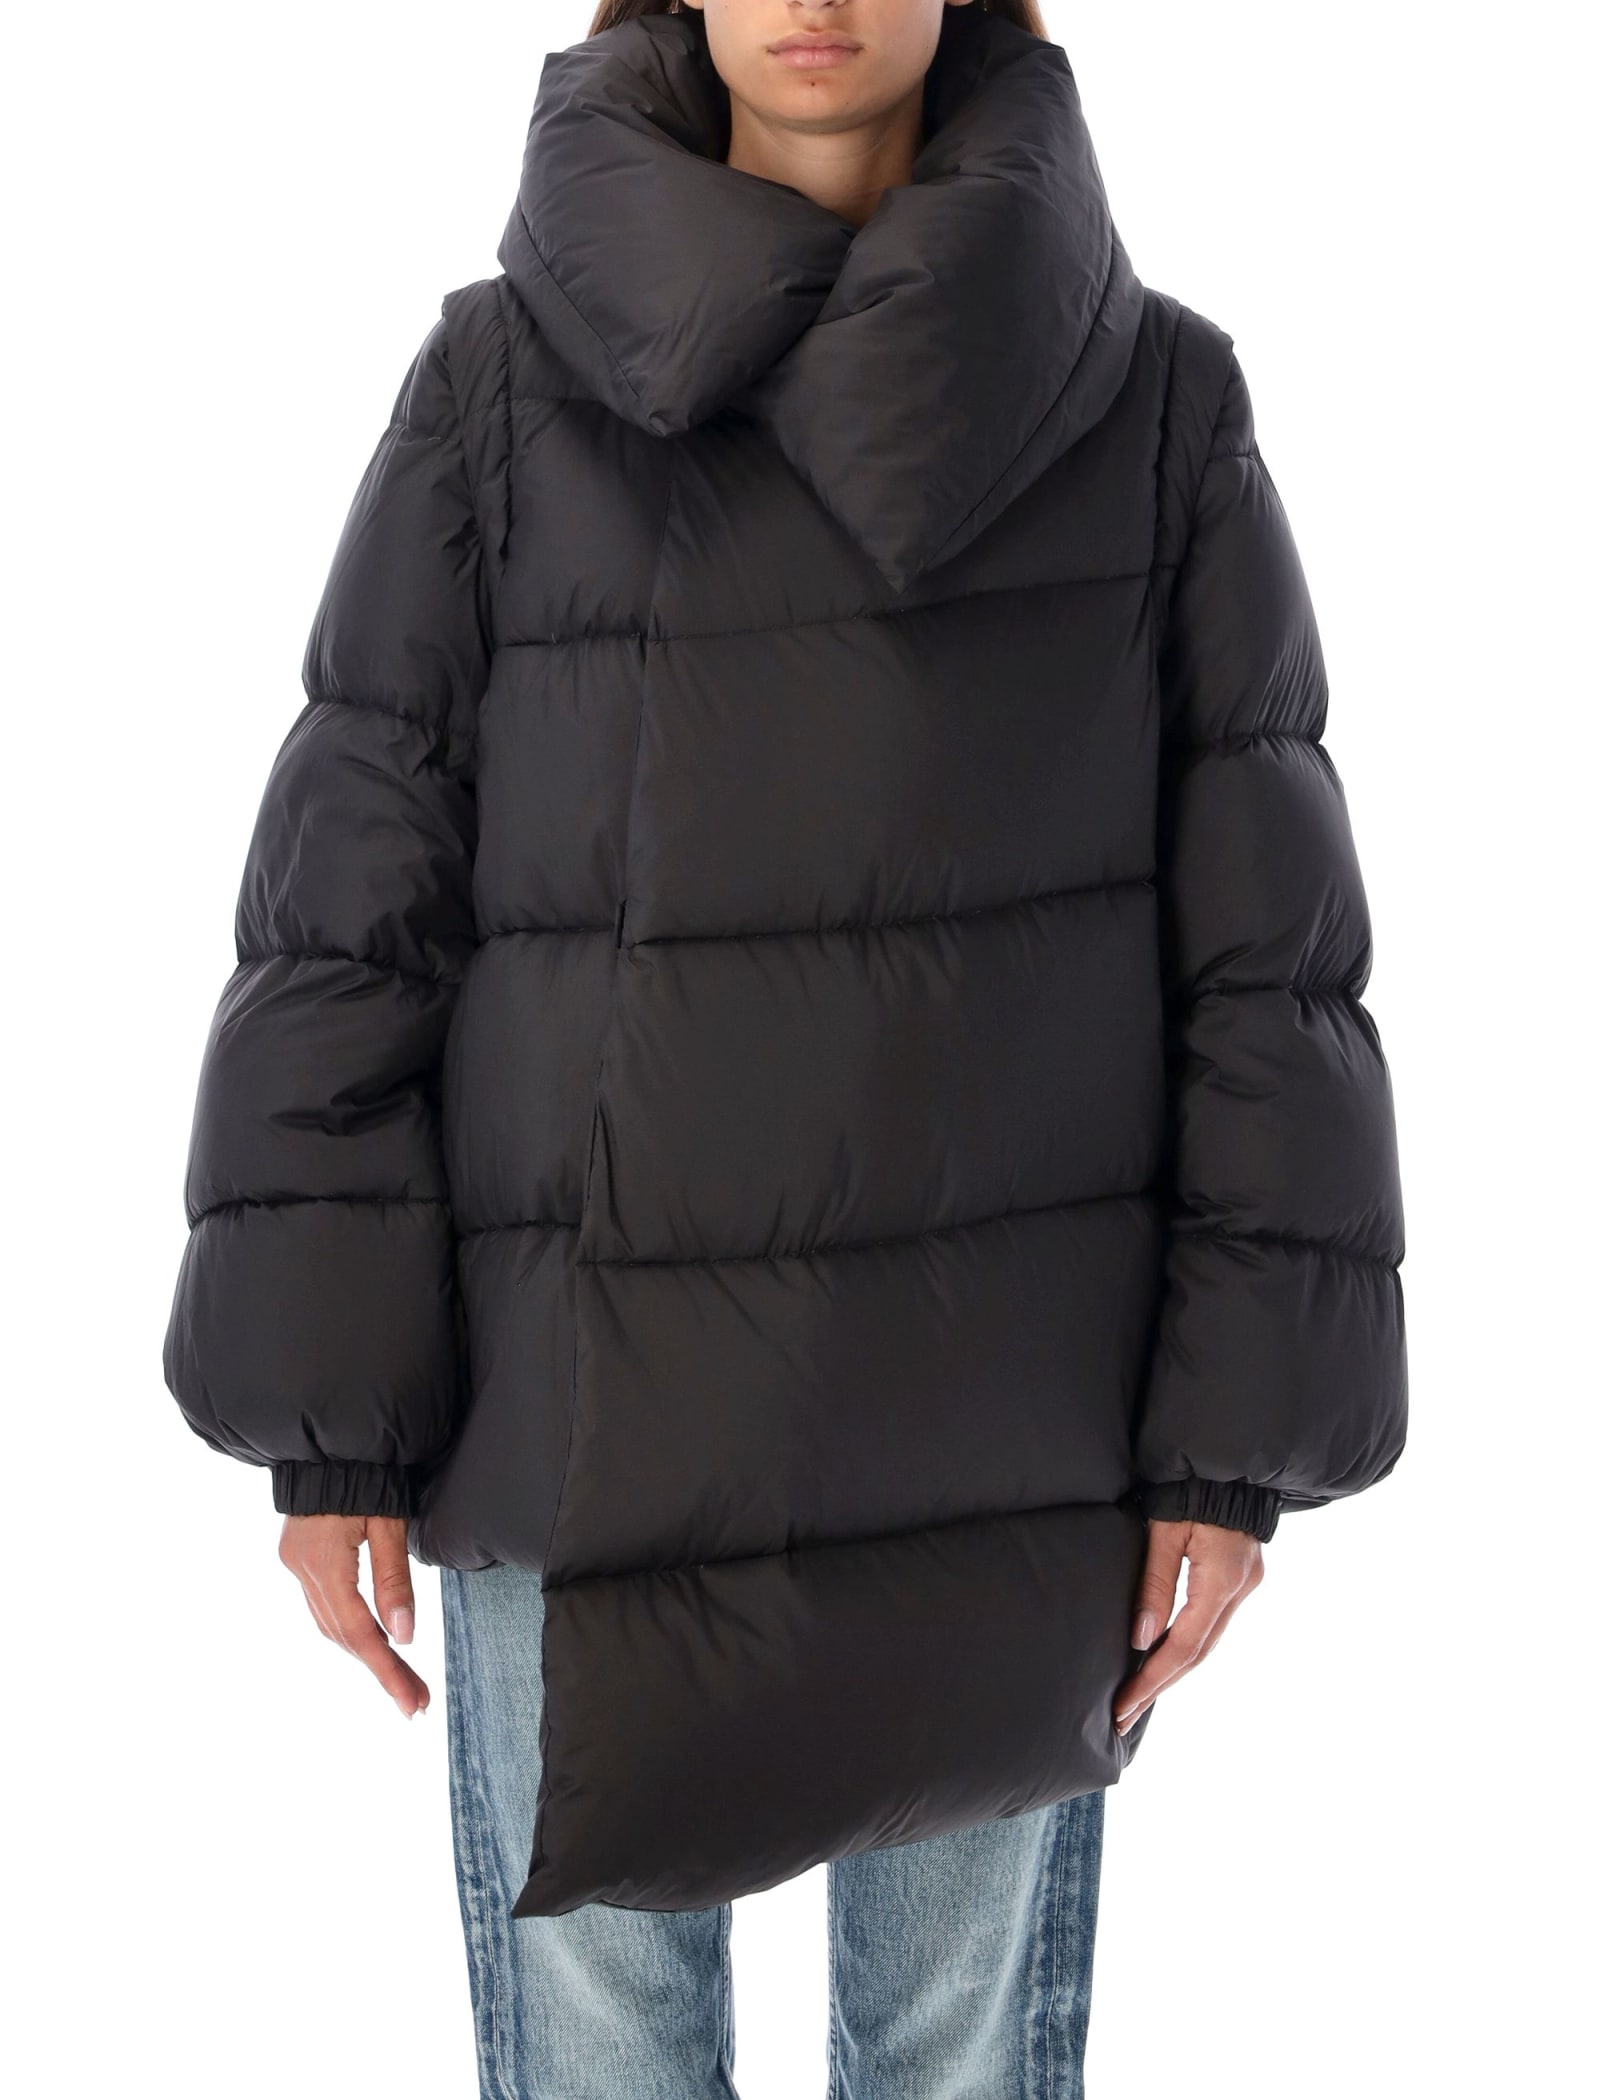 Add Down Jacket With Detachable Sleeves